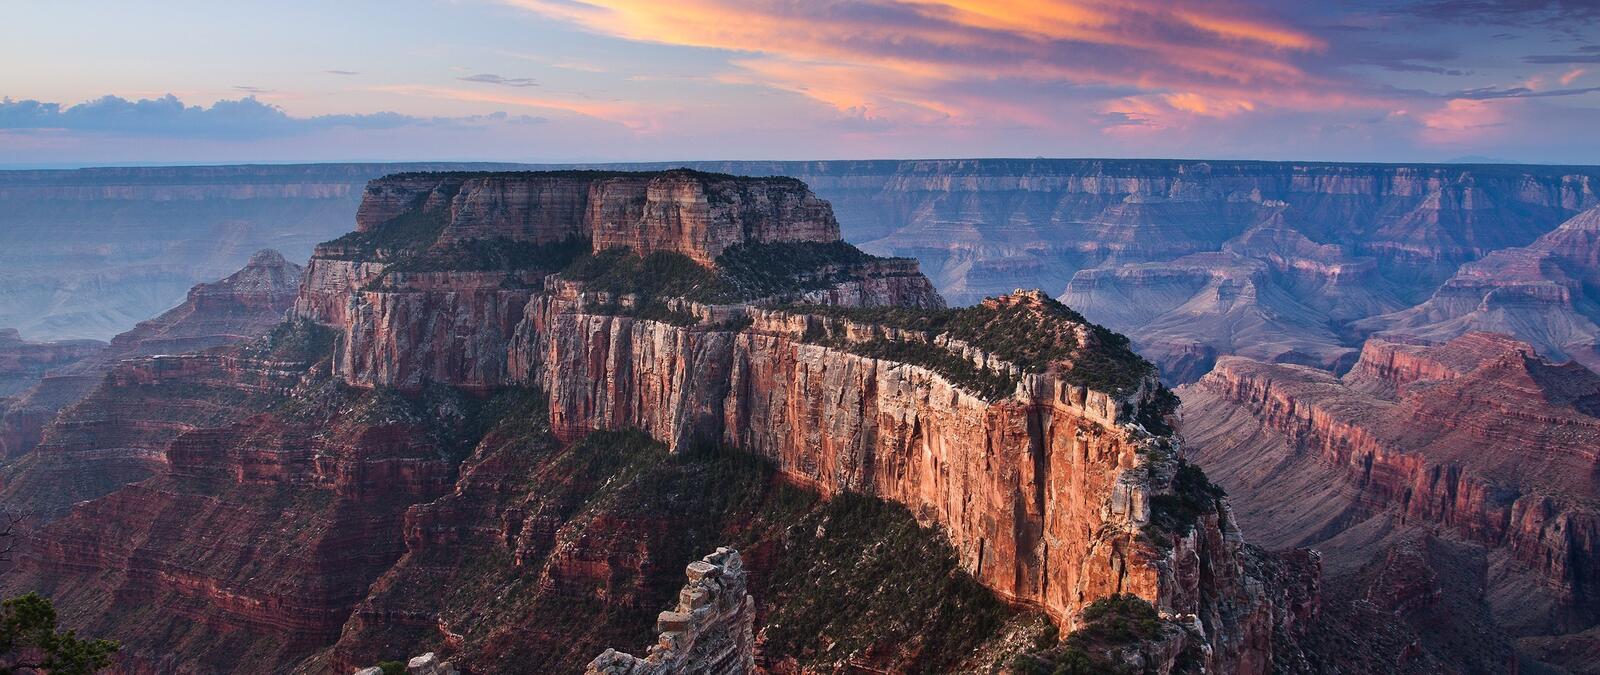 Wallpapers Montana nature the Grand Canyon on the desktop